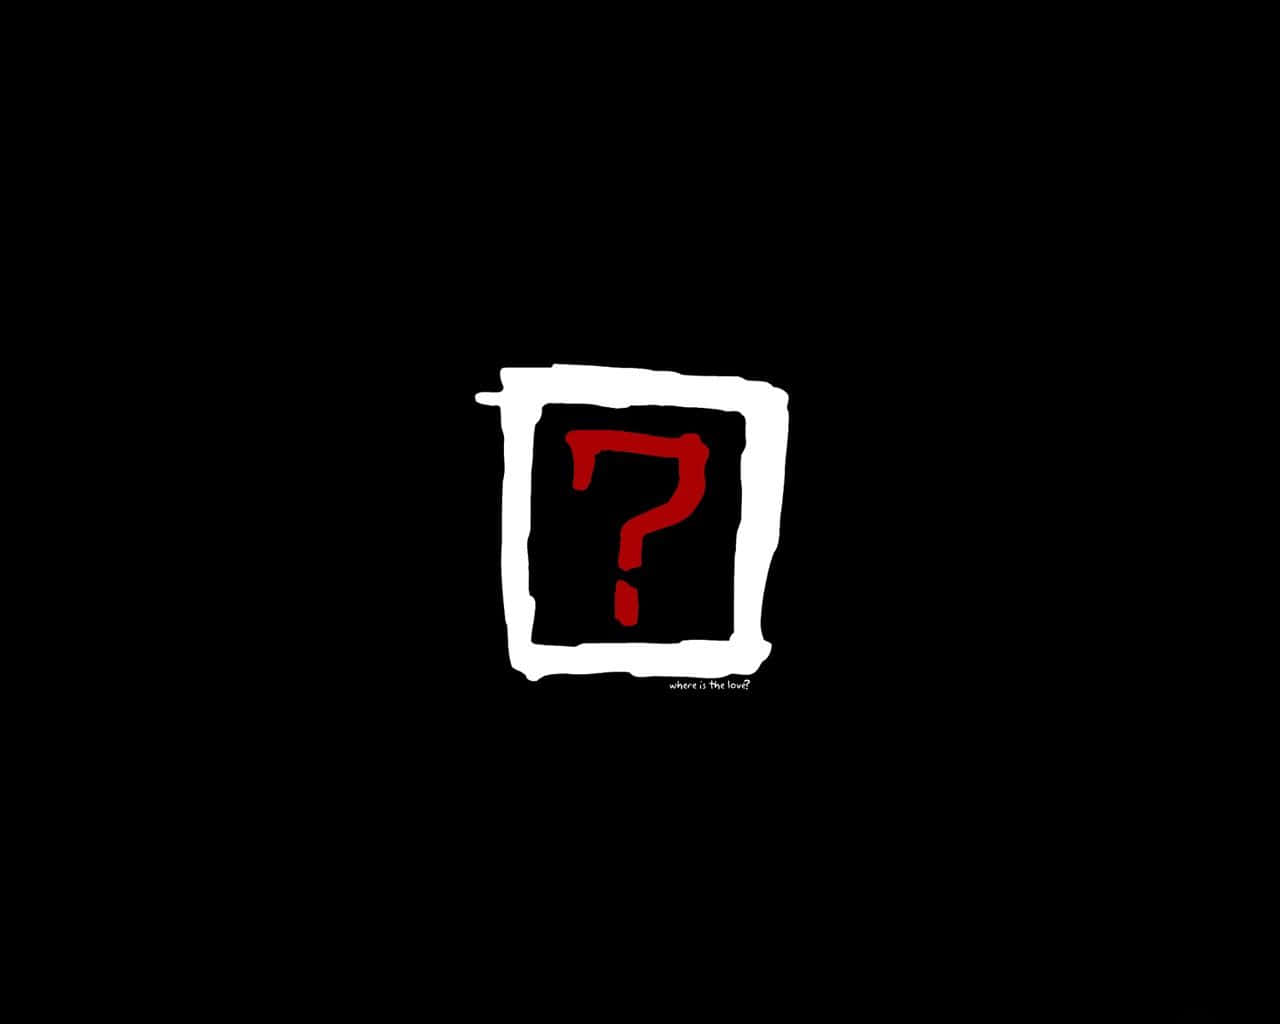 A Black Background With A Red Question Mark On It